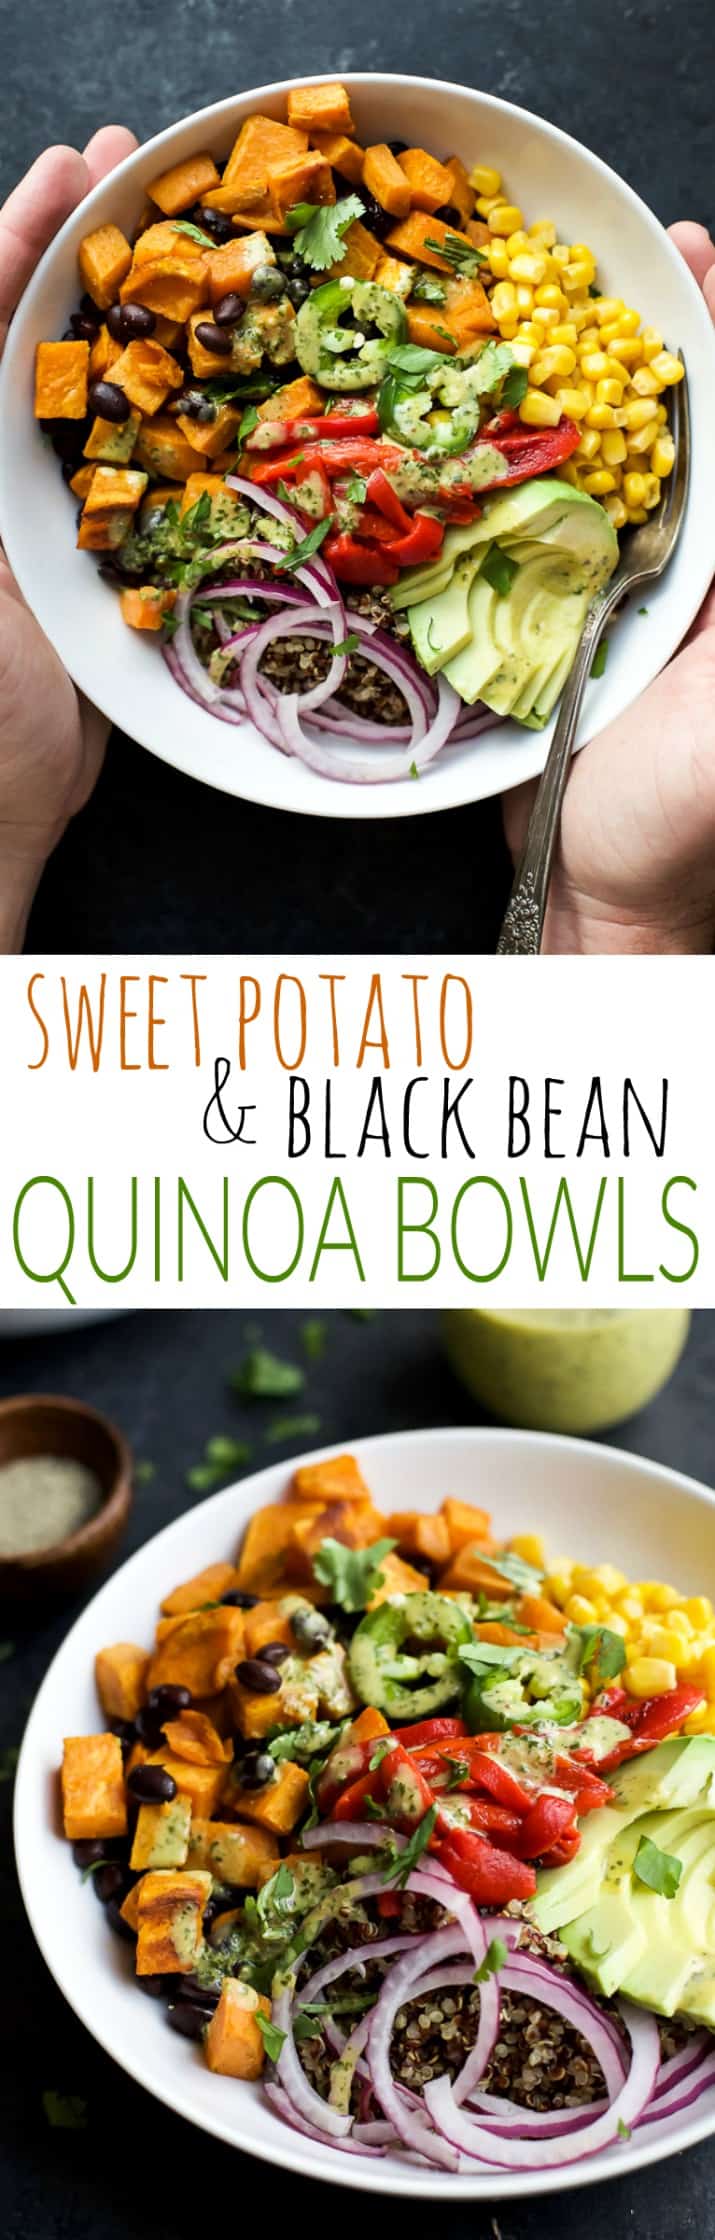 Easy SWEET POTATO BLACK BEAN QUINOA BOWLS topped with a zesty Cilantro Dressing you'll want to pour all over. A fresh vegetarian meal that will satisfy even those meat lovers! | joyfulhealthyeats.com #glutenfree